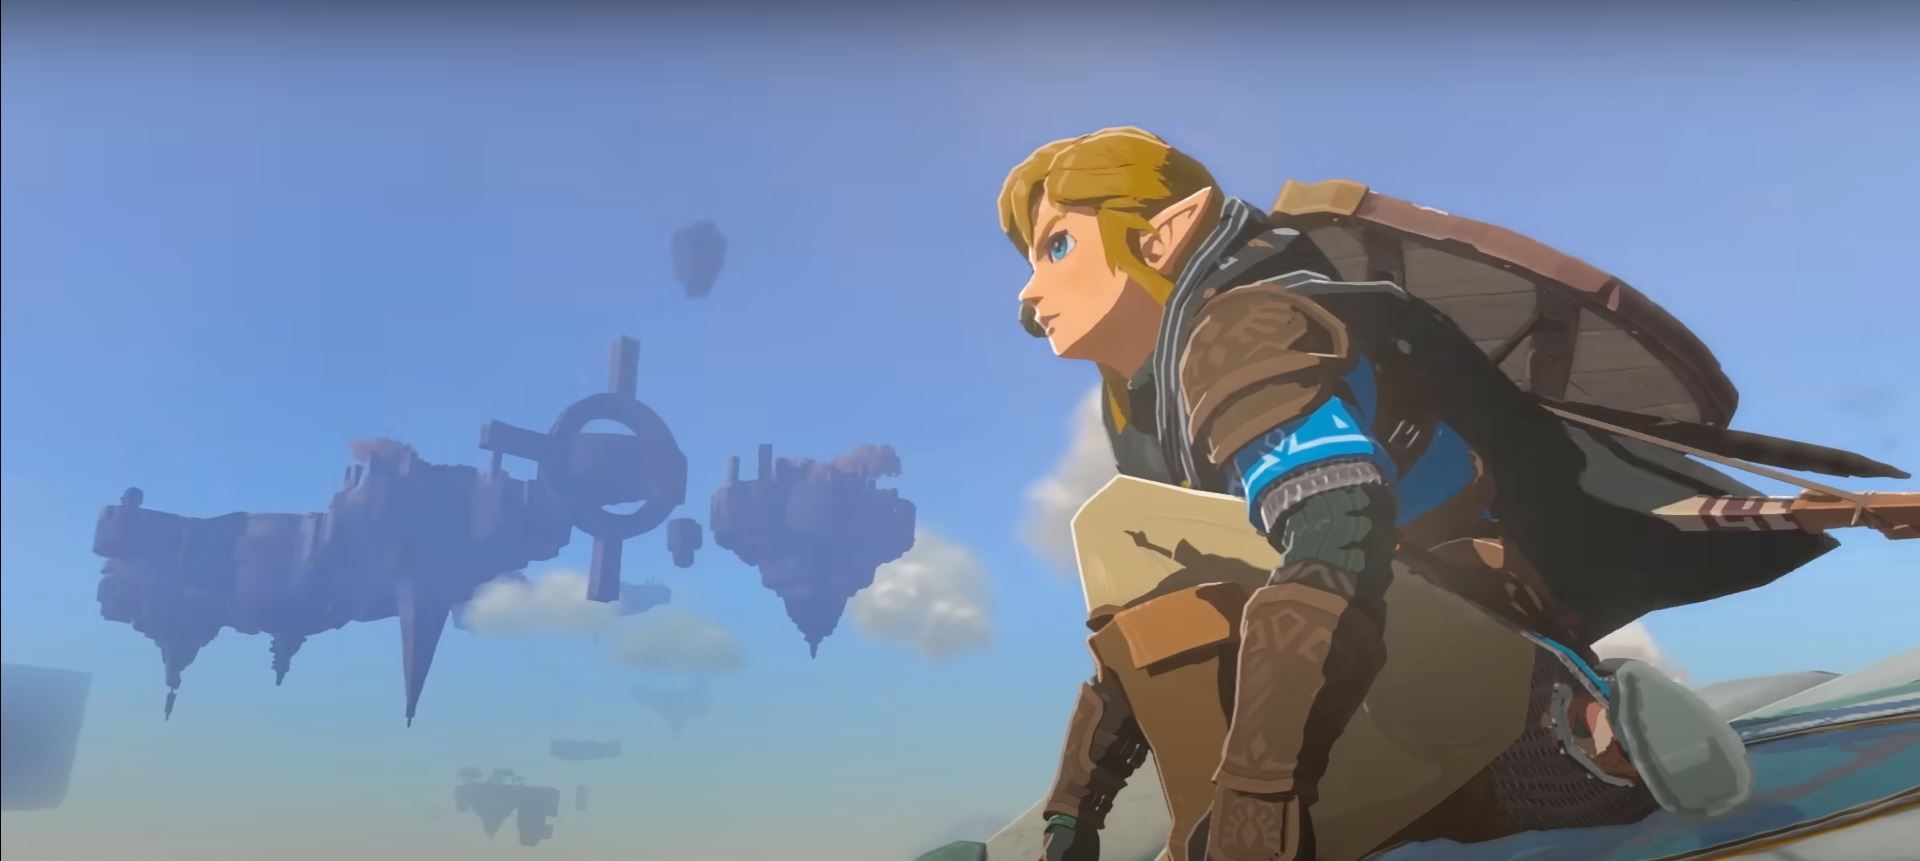 Link stands on a device and flies over Hyrule in The Legend of Zelda: Tears of the Kingdom.